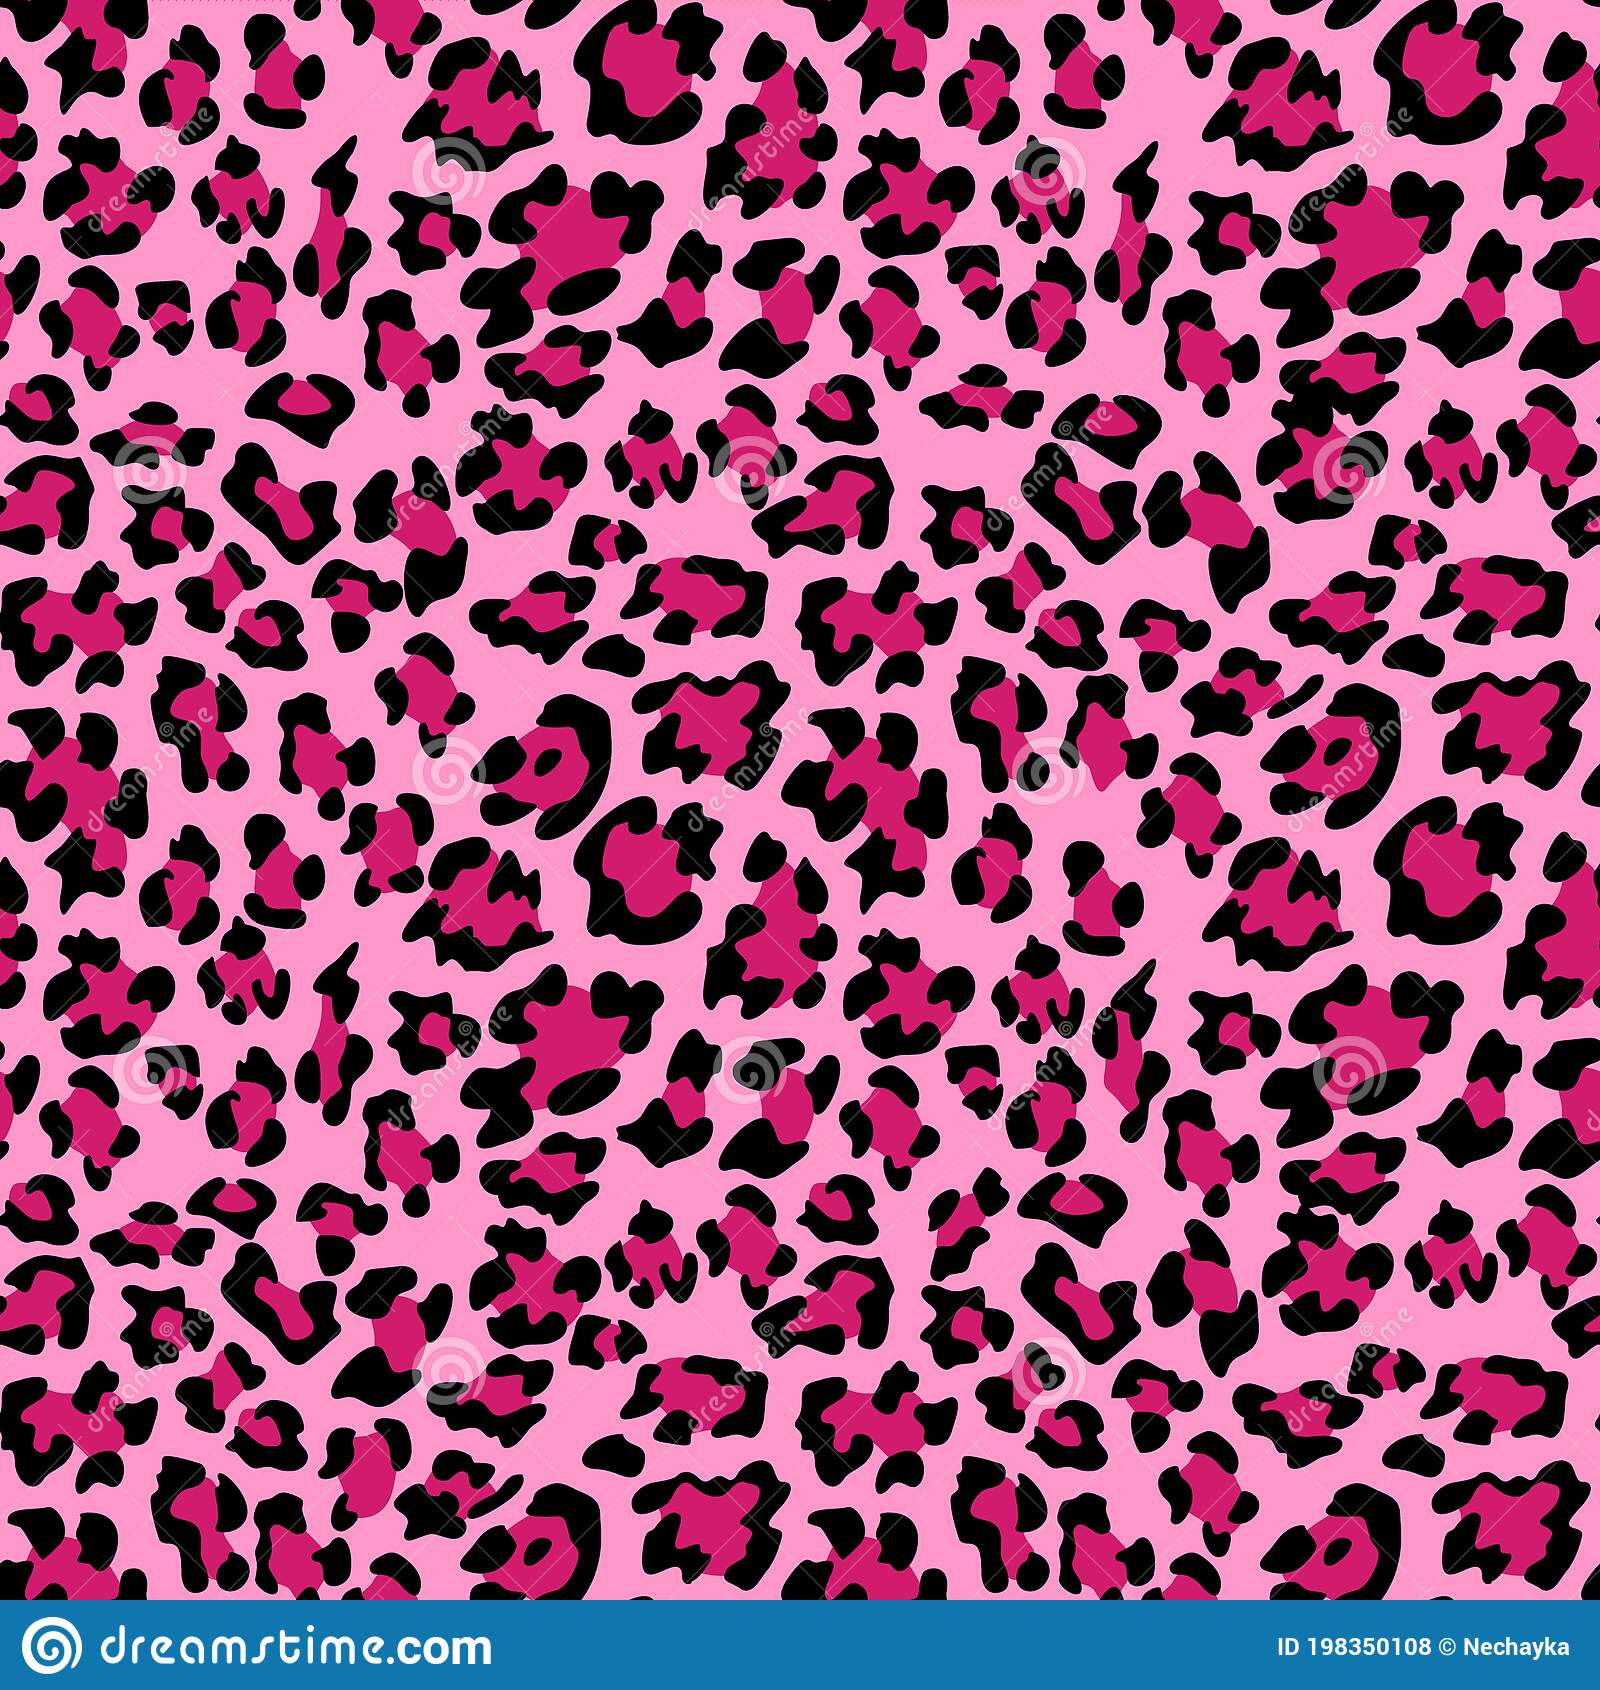 Pink leopard print background animal seamless pattern with hand drawn leopard spots pink wallpaper stock vector